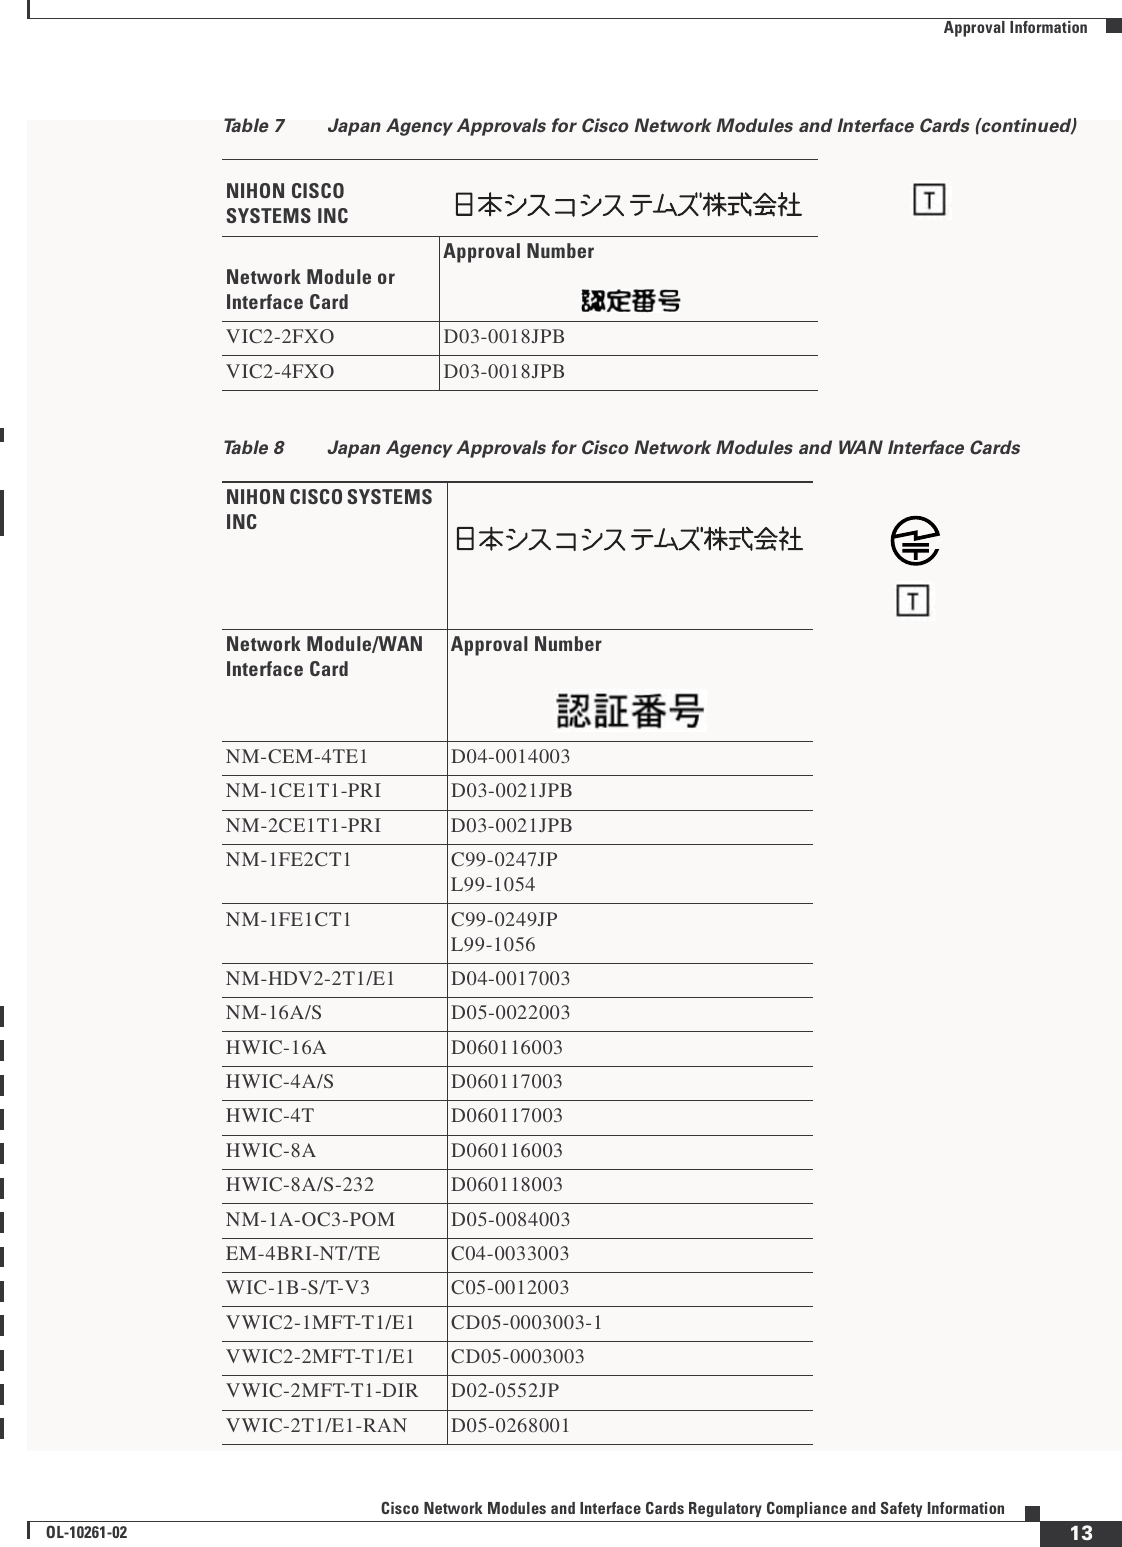 12Cisco Network Modules and Interface Cards Regulatory Compliance and Safety InformationOL-10261-02  Approval InformationJapanTable 7 Japan Agency Approvals for Cisco Network Modules and Interface CardsNIHON CISCO SYSTEMS INCNetwork Module or Interface CardApproval NumberEM-HDA-4FXO A02-0195JPNM-4A/S N97-K007-0NM-8A/S N97-K006-0NM-4B-S/T T97-5319-0NM-8B-S/T T97-5320-0NM-1CT1 T97-6309-0N97-K034-0NM-2CT1 T97-6310-0N97-K035-0NM-1A-0C3SMI N99-N311-0NM-1A-0C3SMI-1V D99-1084JPNM-1A-OC3SML N99-N312-0NM-1A-OC3SML-1V D99-1083JPNM-1A-OC3MM L00-0316NM-1ATM25 N99-N320-0WIC-1T N96-K075-0WIC-1ADSL L02-0018WIC-2A/S M98-N028-0WIC-2T N98-N024-0WIC-1B-S/T T96-5295-0WIC-1DSU-T1 N98-N018-0WIC-1DSU-T1 V2 D03-0006JPBVIC-2BRI-NT/TE C00-1009JPL00-0273VIC-2BRI-S/T-TE T99-0302-0VIC2-2BRI-NT/TE C03-003JPBVIC2-2E/M D03-0022JPB46464